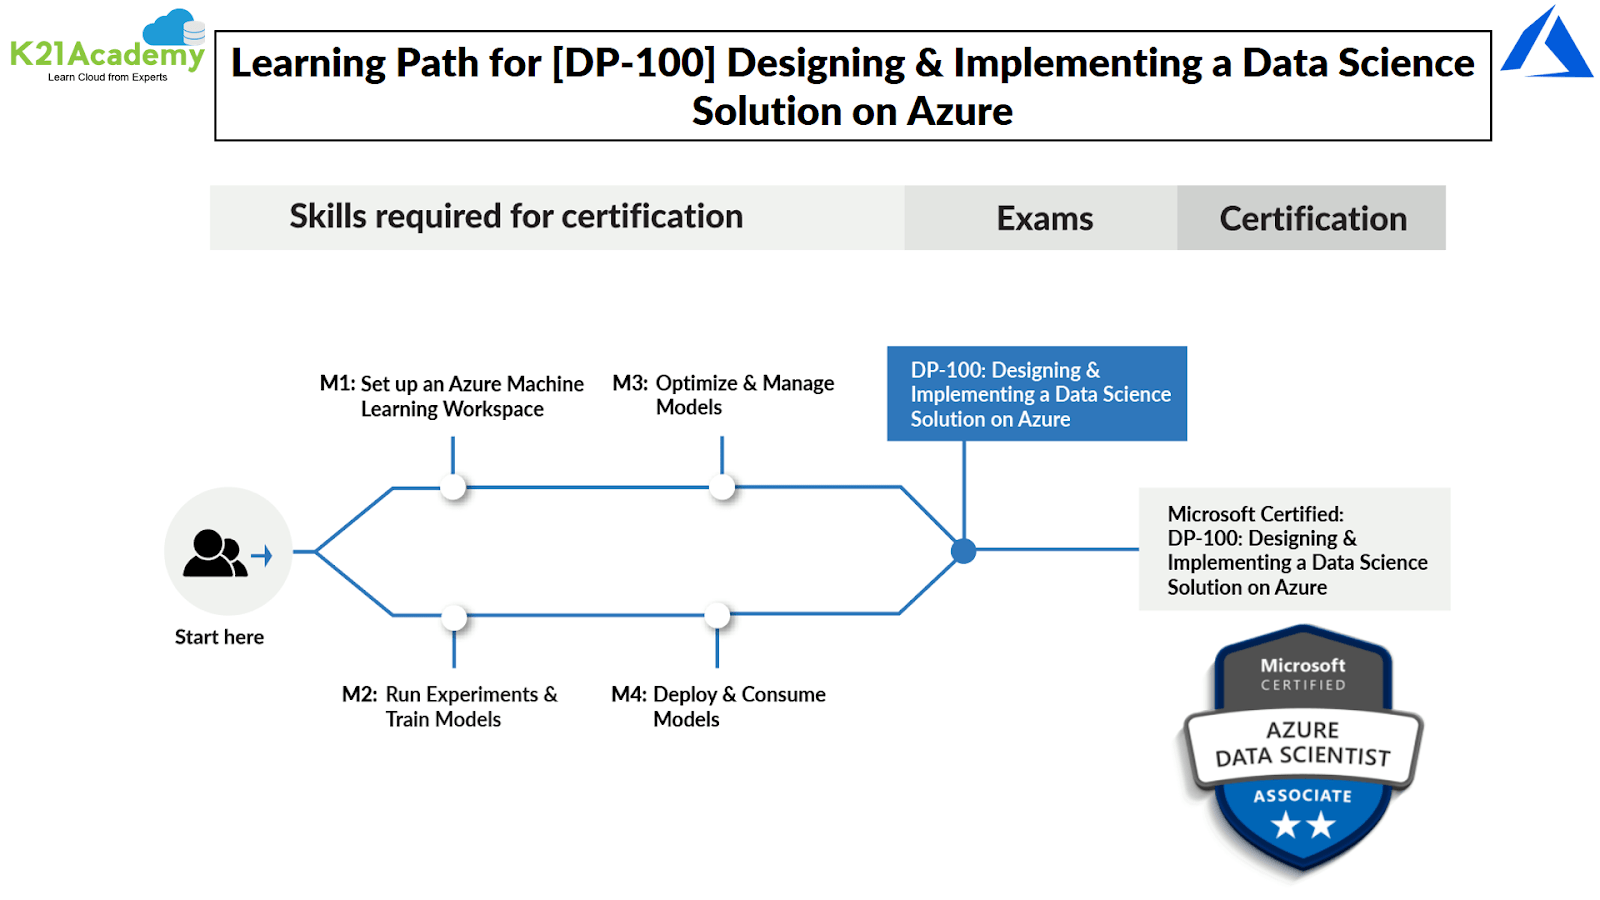 DP-100 learning path